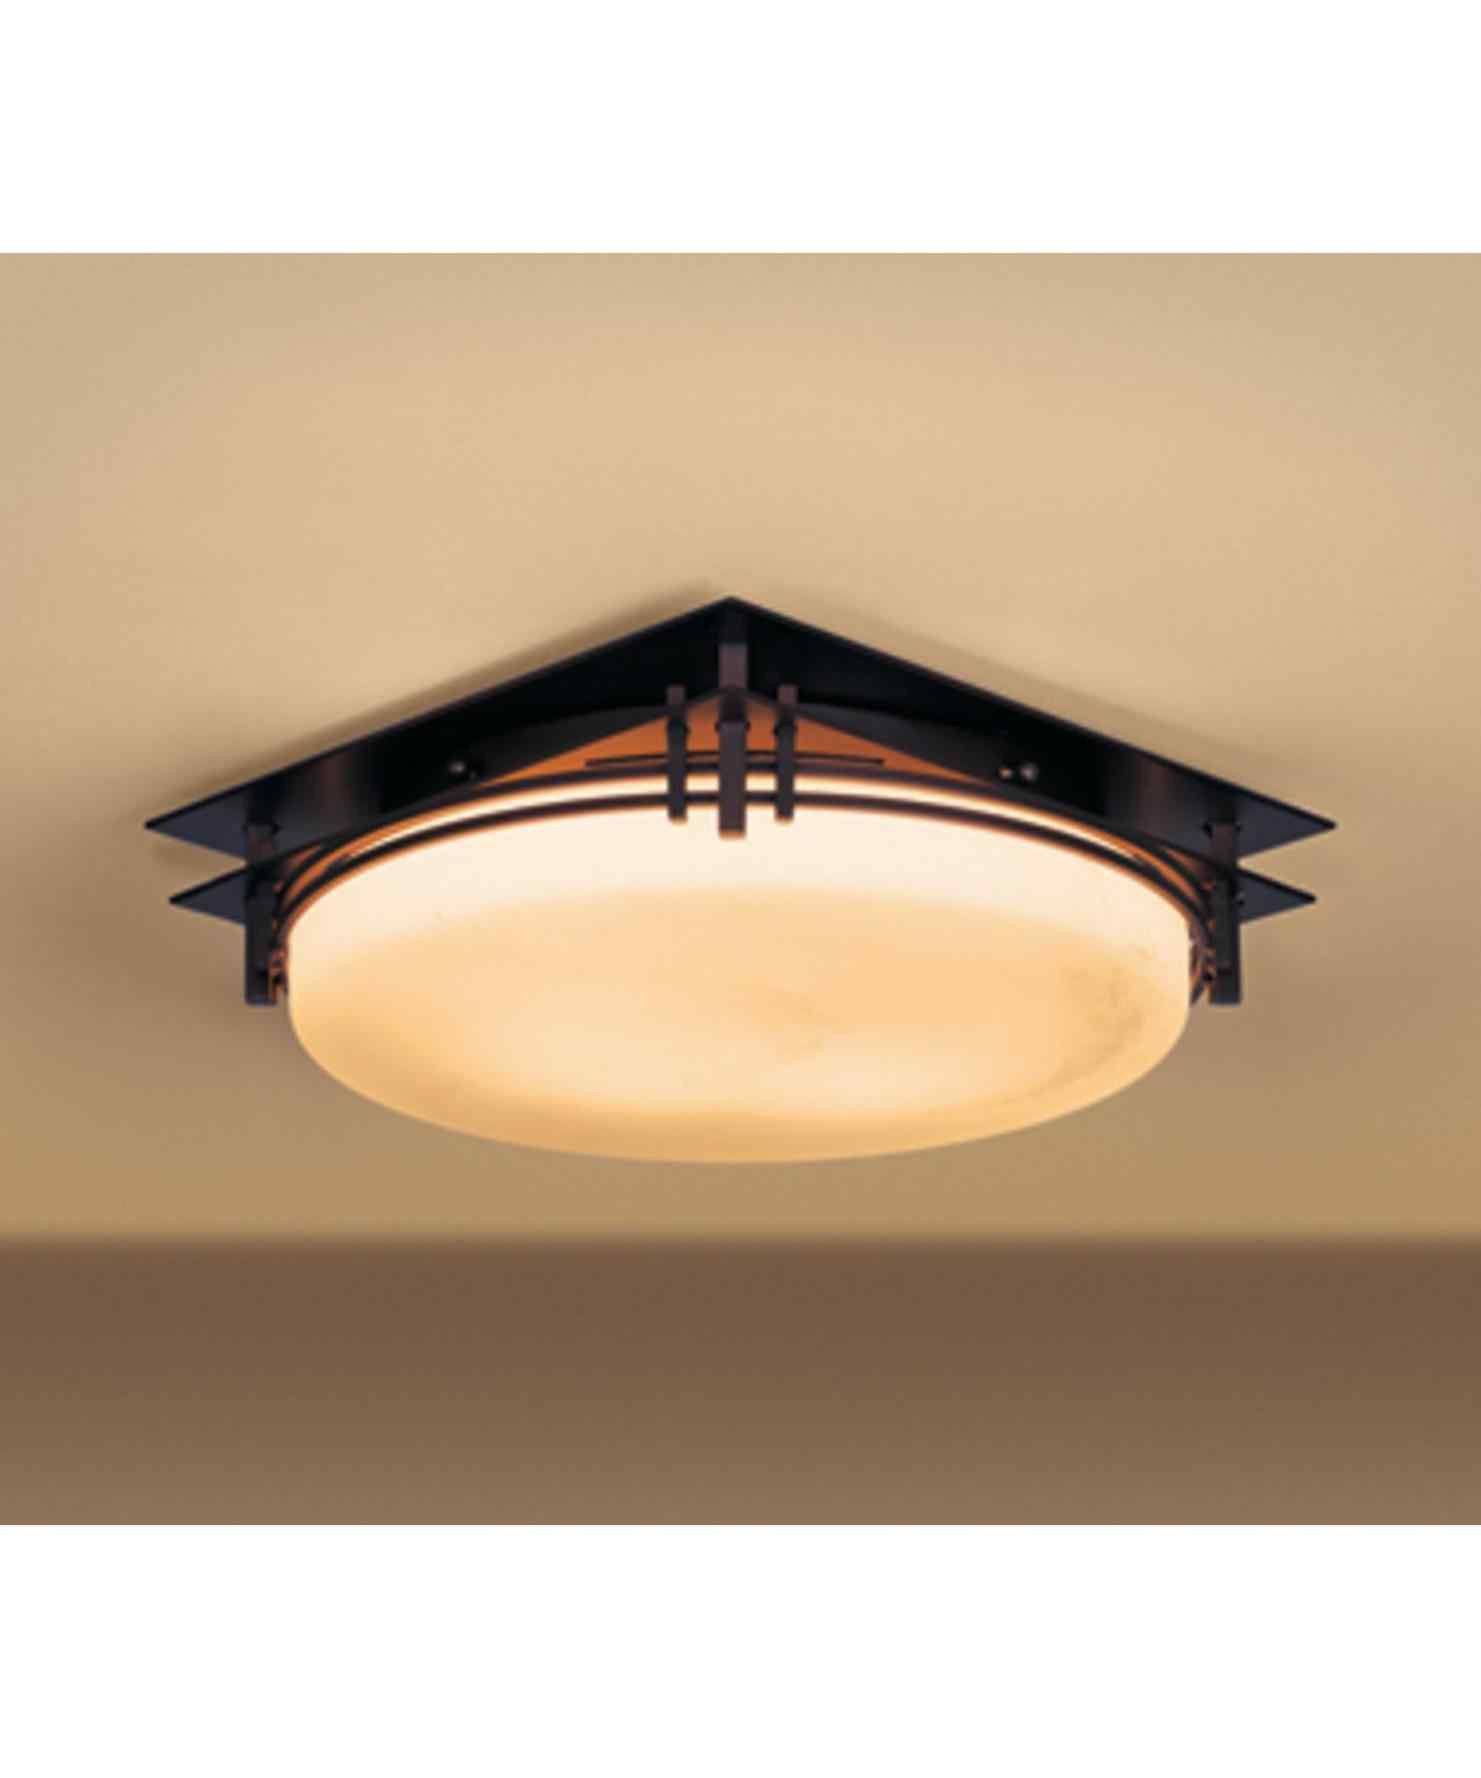 Lowes Kitchen Light Fixtures
 Mission Style Lighting Lowes